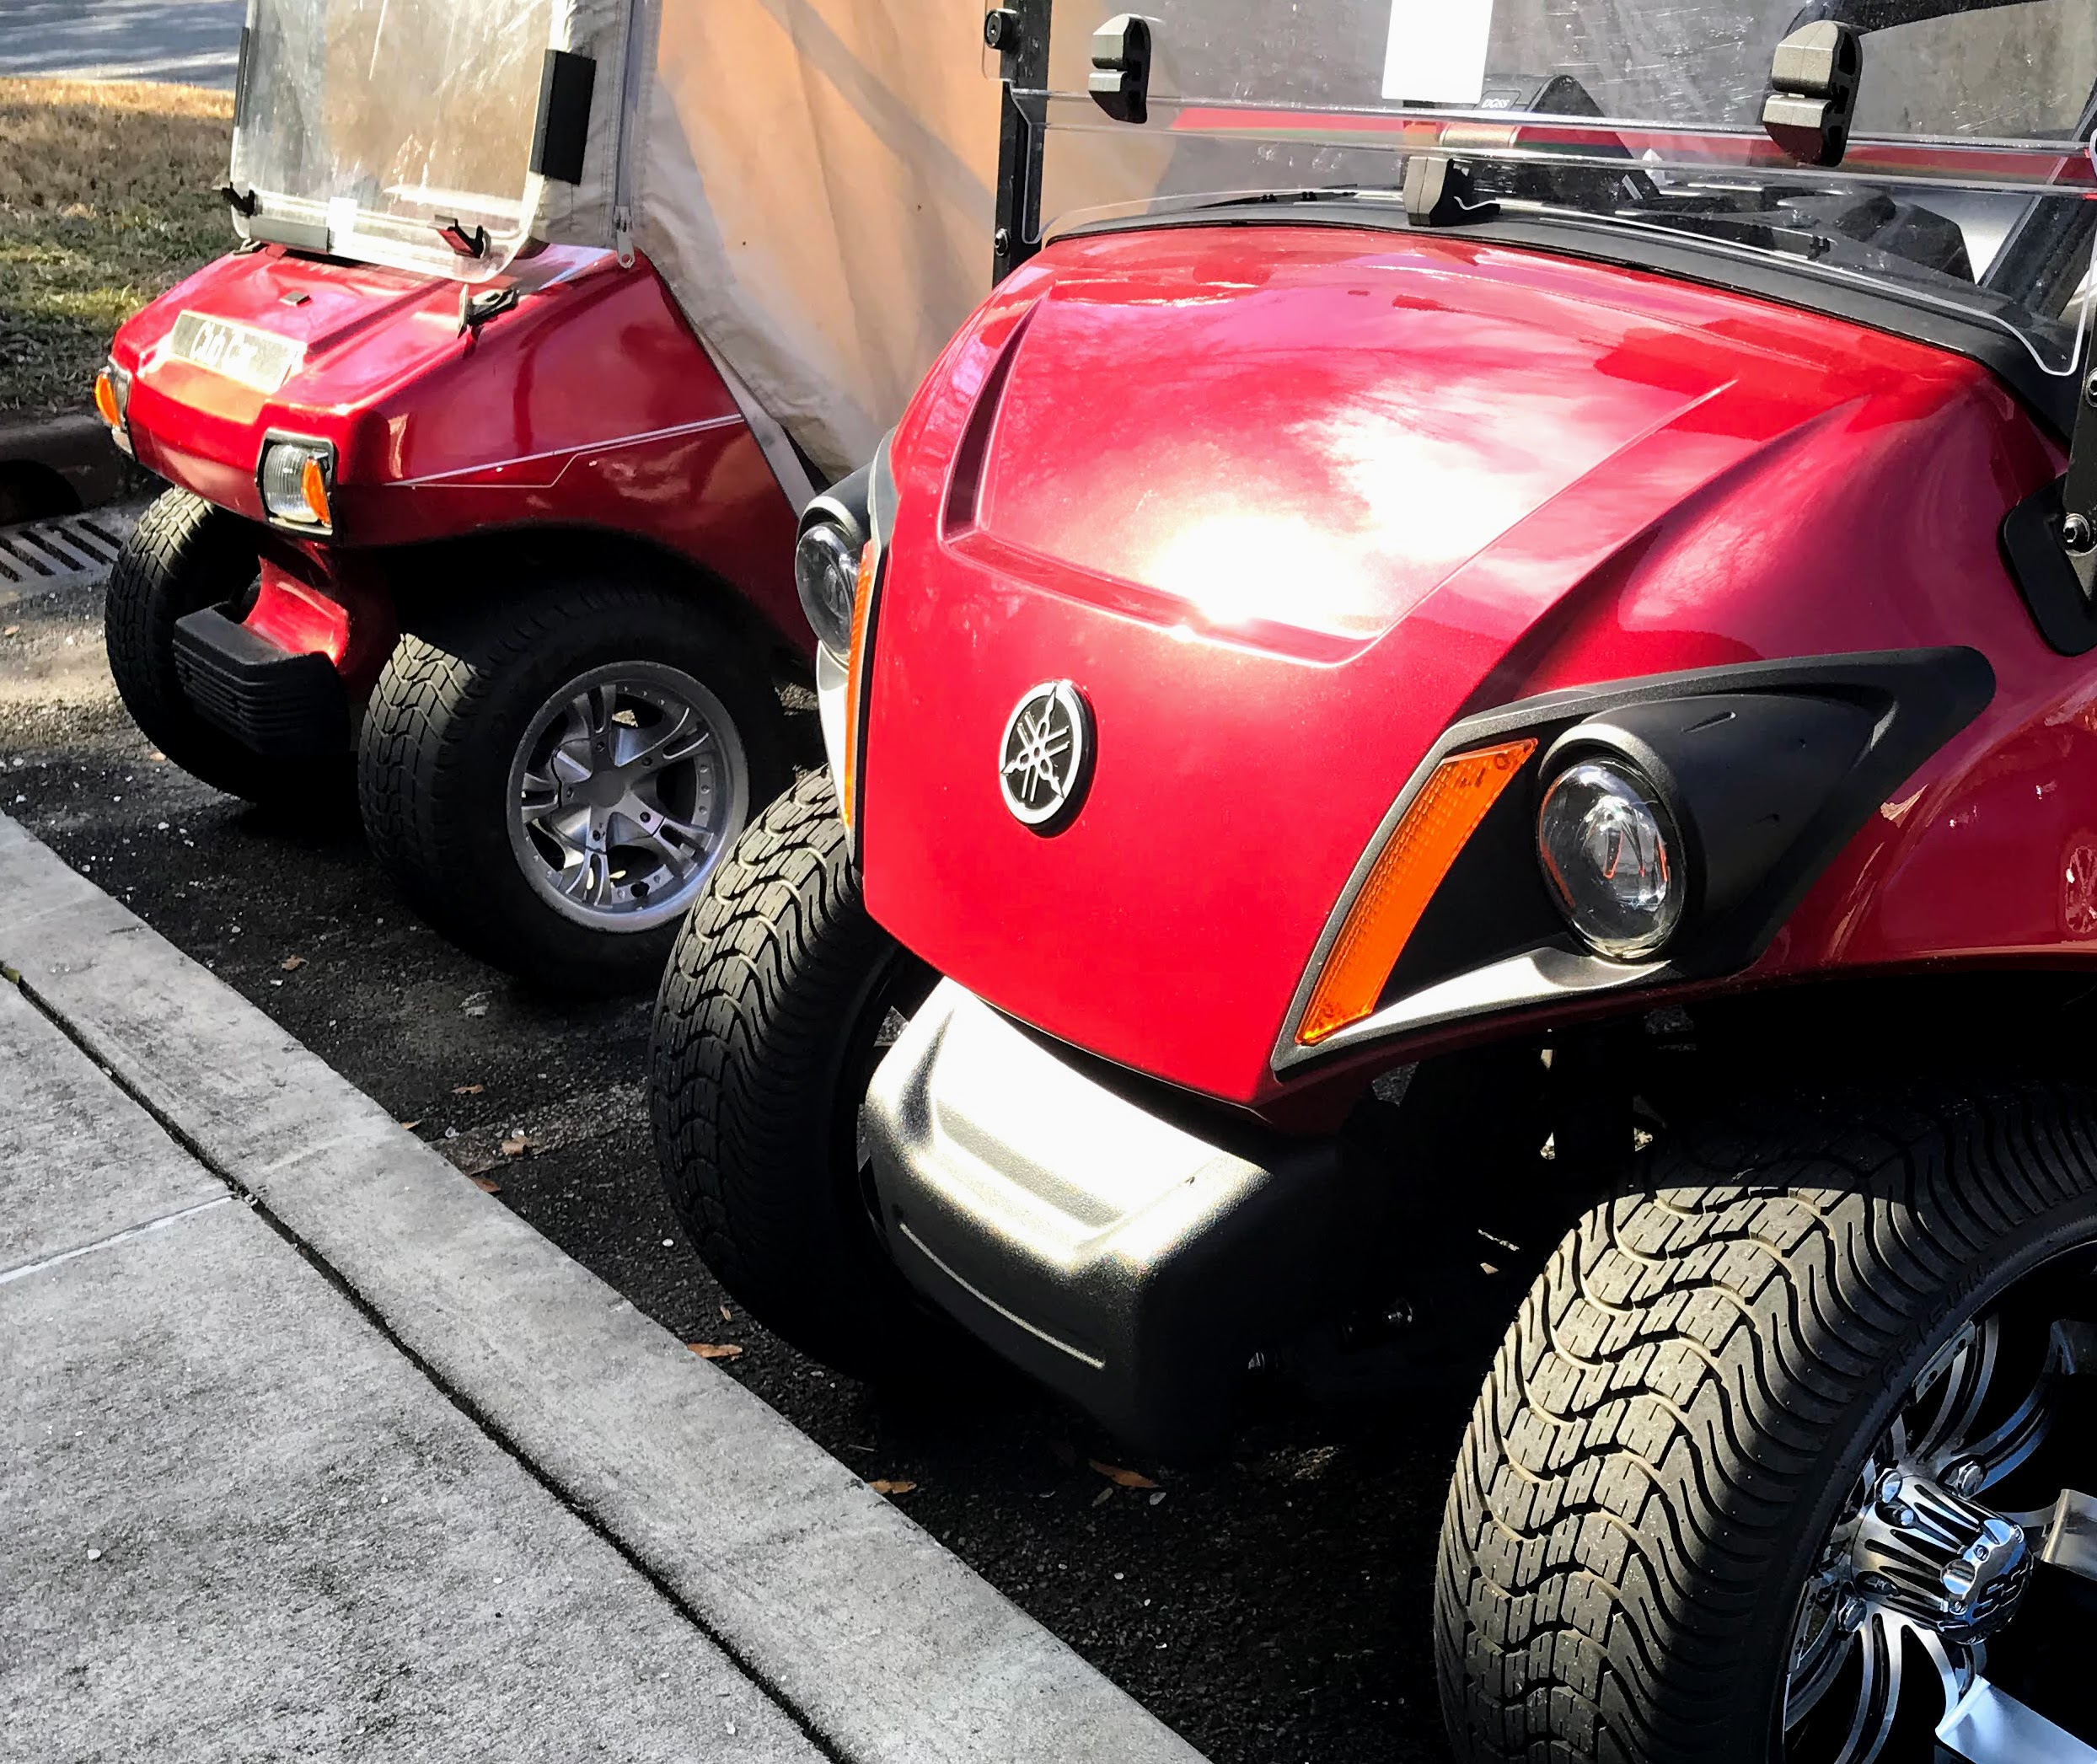 a red Club Car DS and a red Yamaha golf cart body